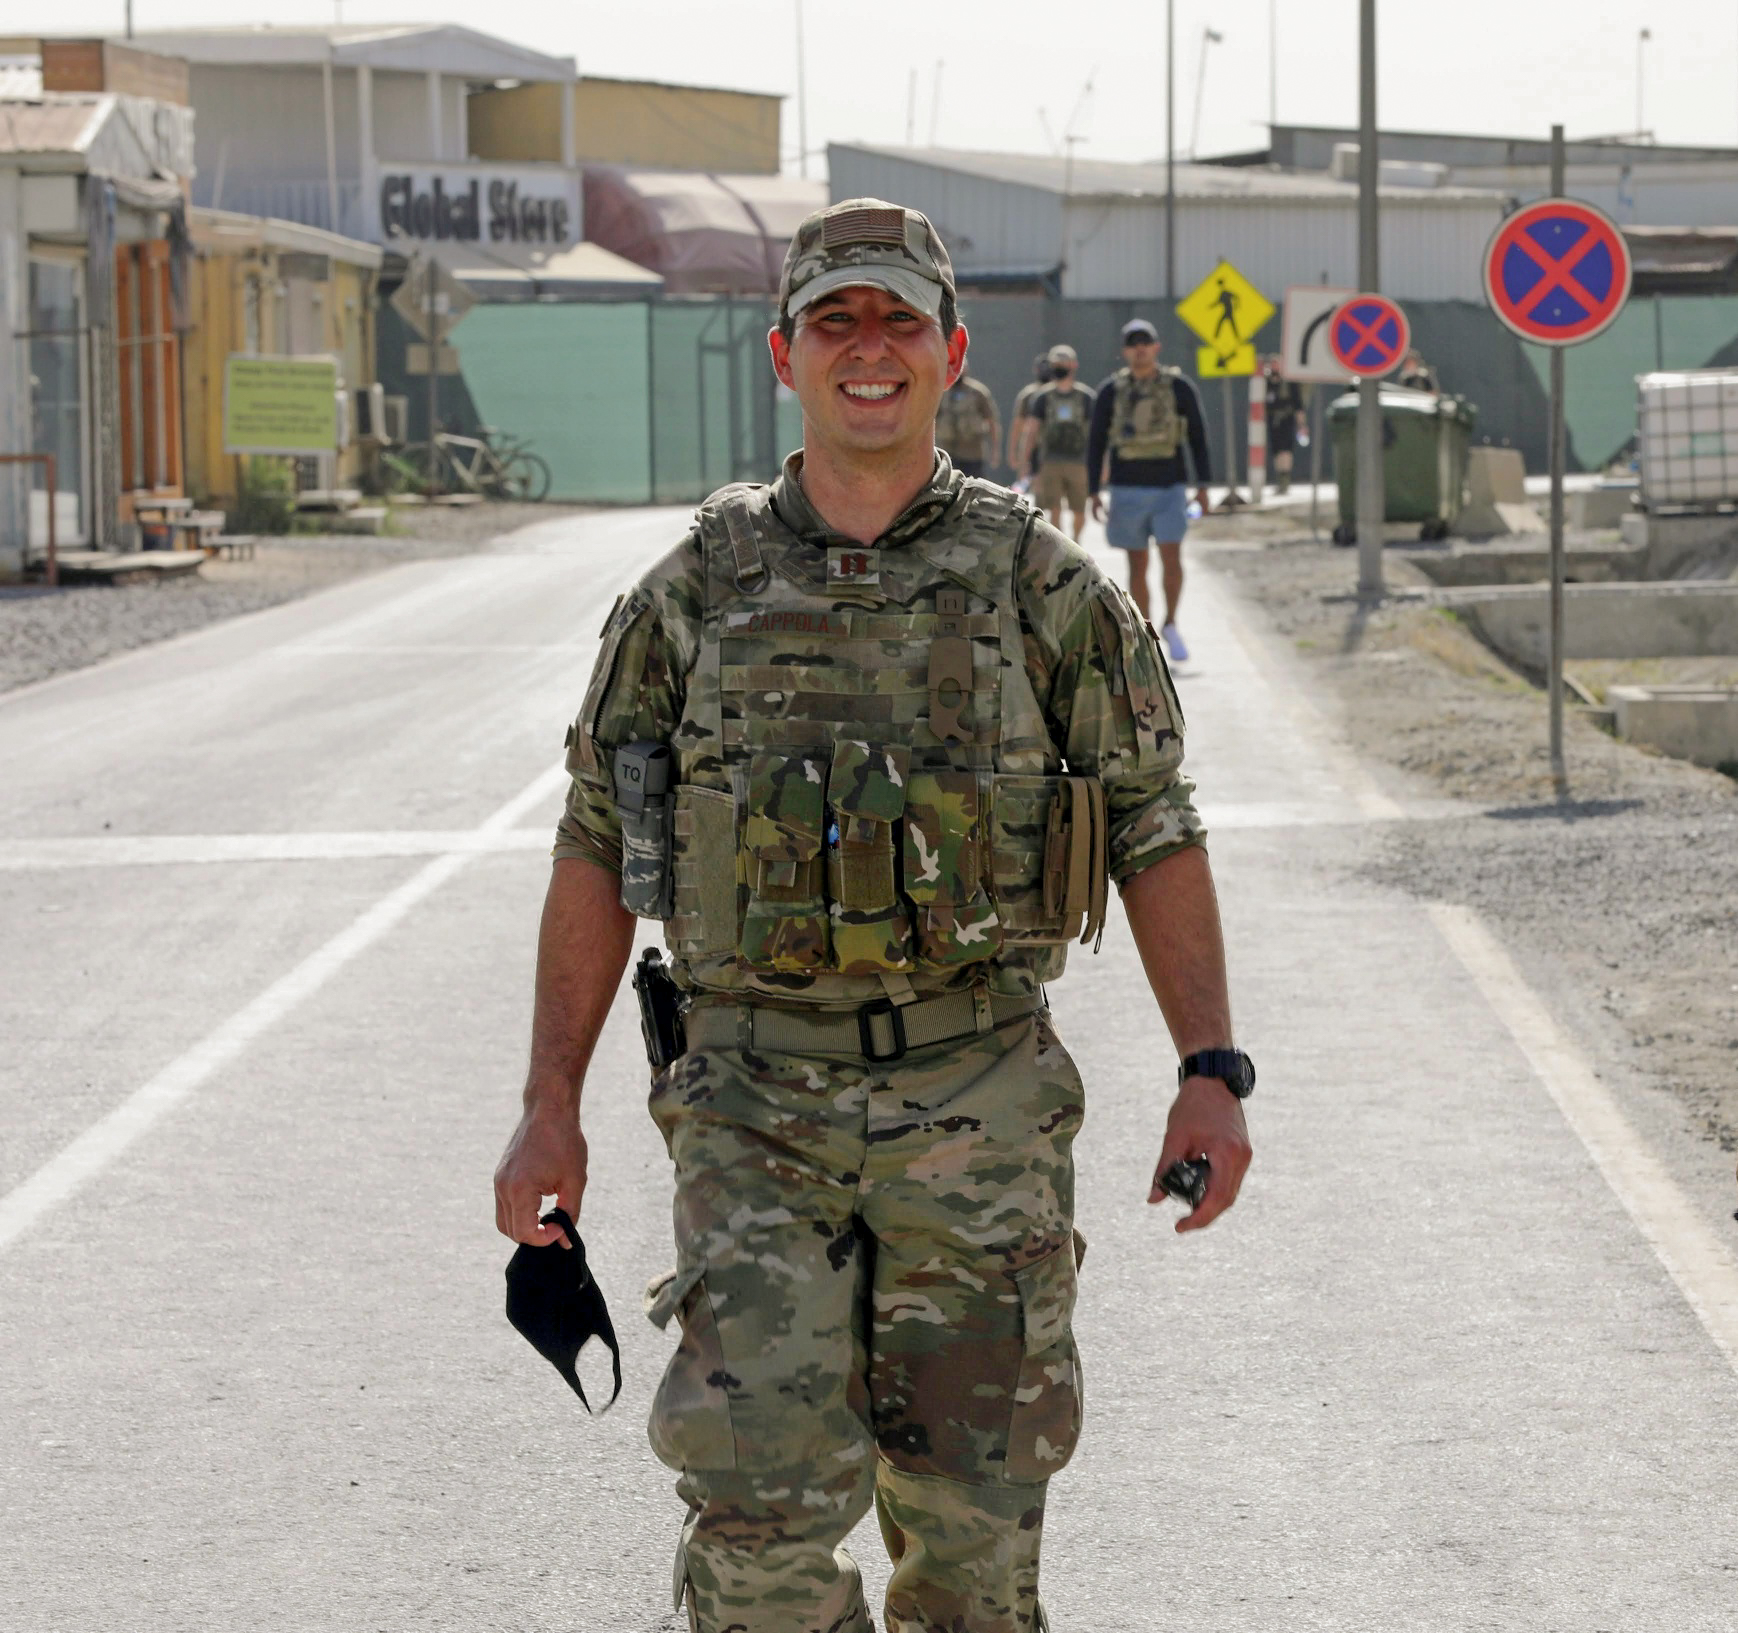 Then-Captain Joseph Cappola poses in uniform in Afghanistan with individuals walking behind him as part of the 9/11 Memorial Ruck March he organized.